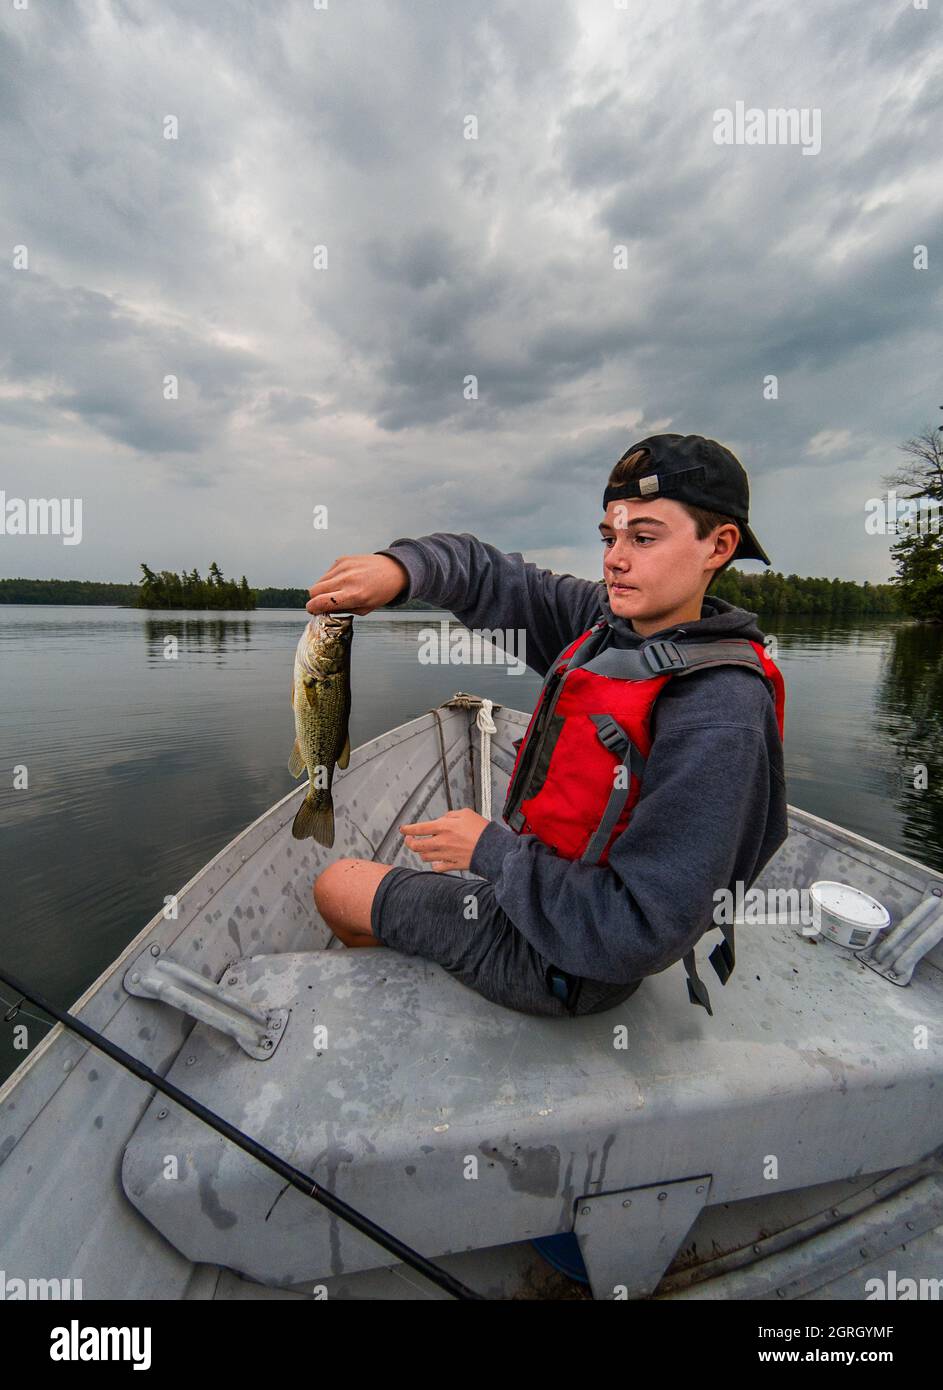 https://c8.alamy.com/comp/2GRGYMF/teen-boy-holding-a-fish-he-caught-in-a-boat-on-a-stormy-day-2GRGYMF.jpg